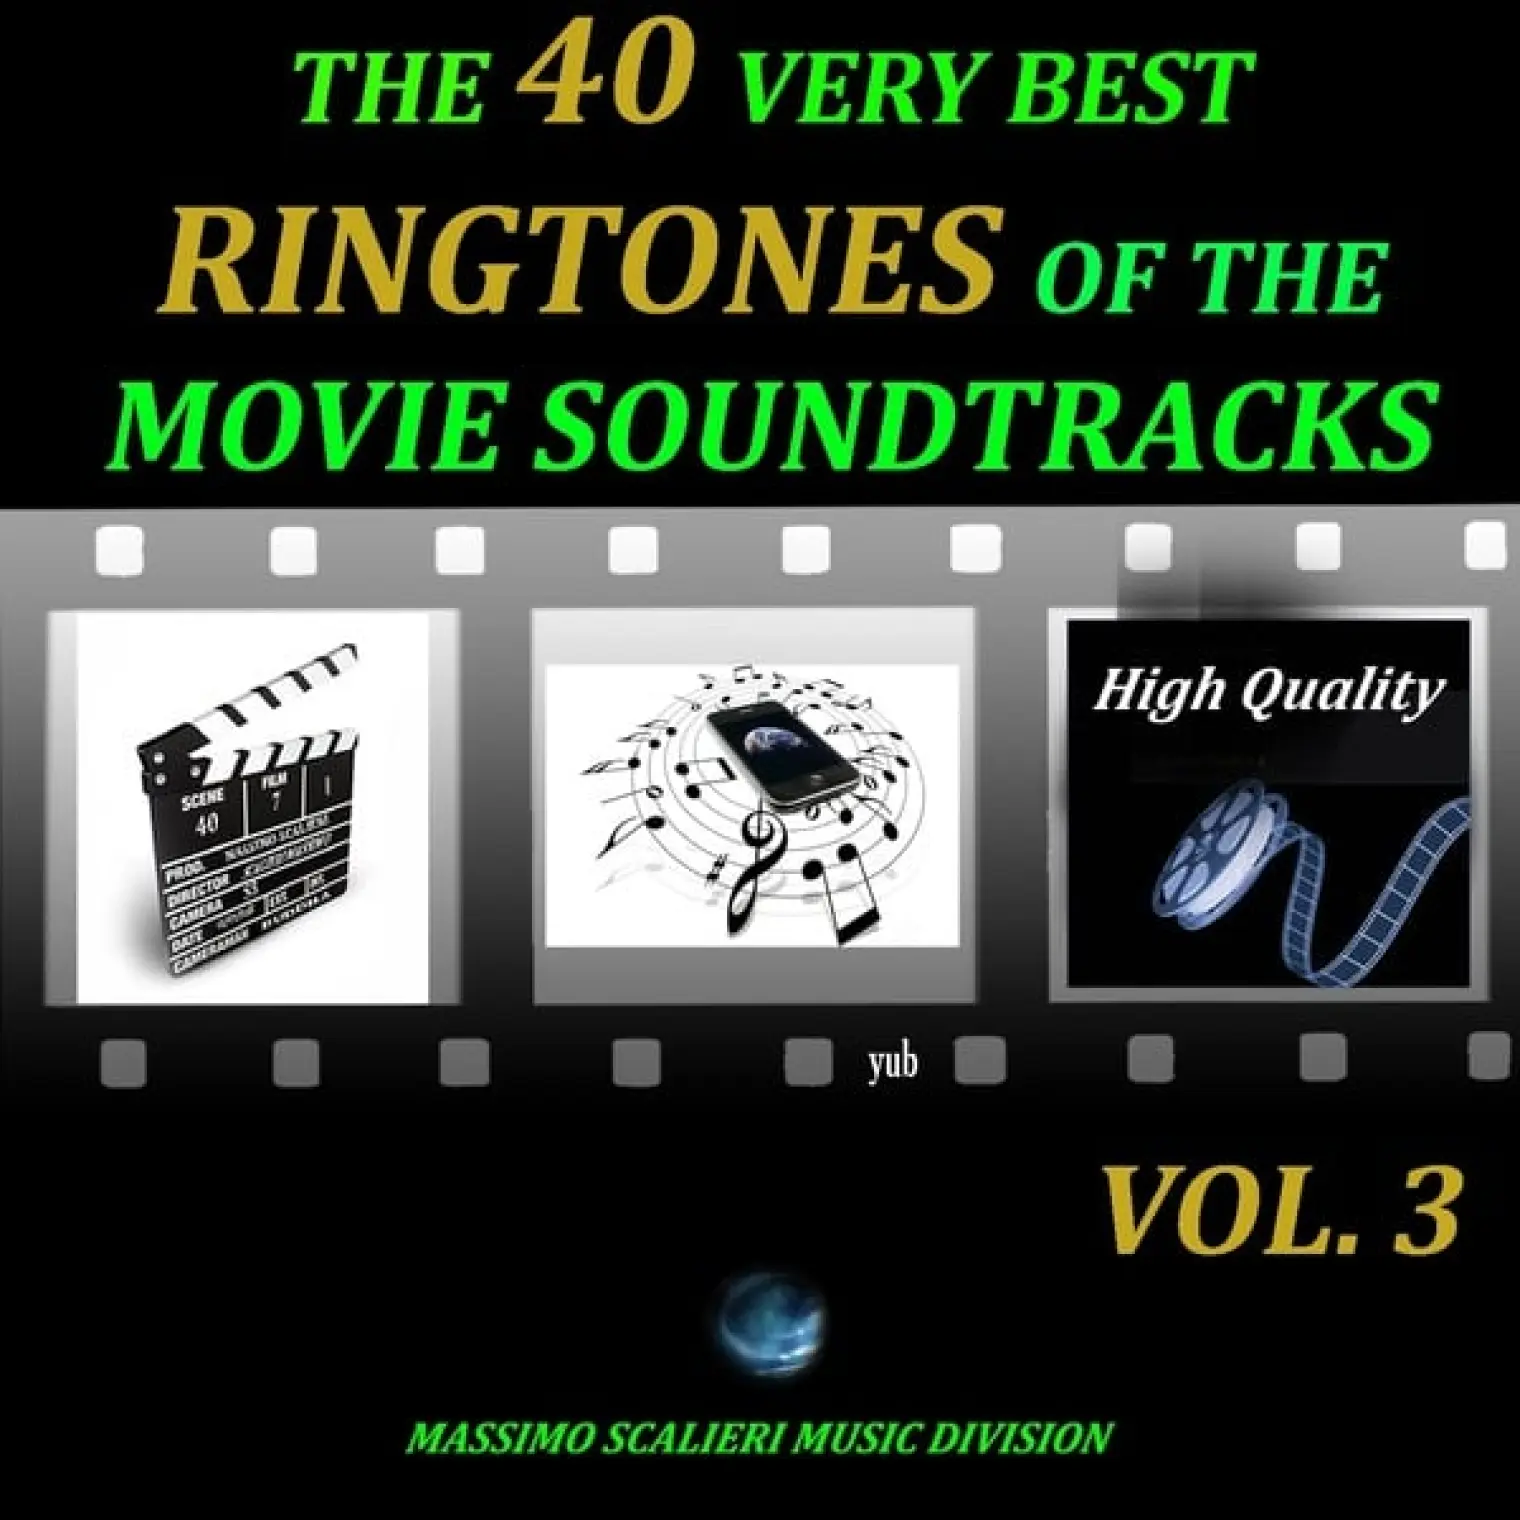 The 40 Very Best Ringtones of the Movie Soundtracks, Vol. 3 (High Quality) -  The Phone 